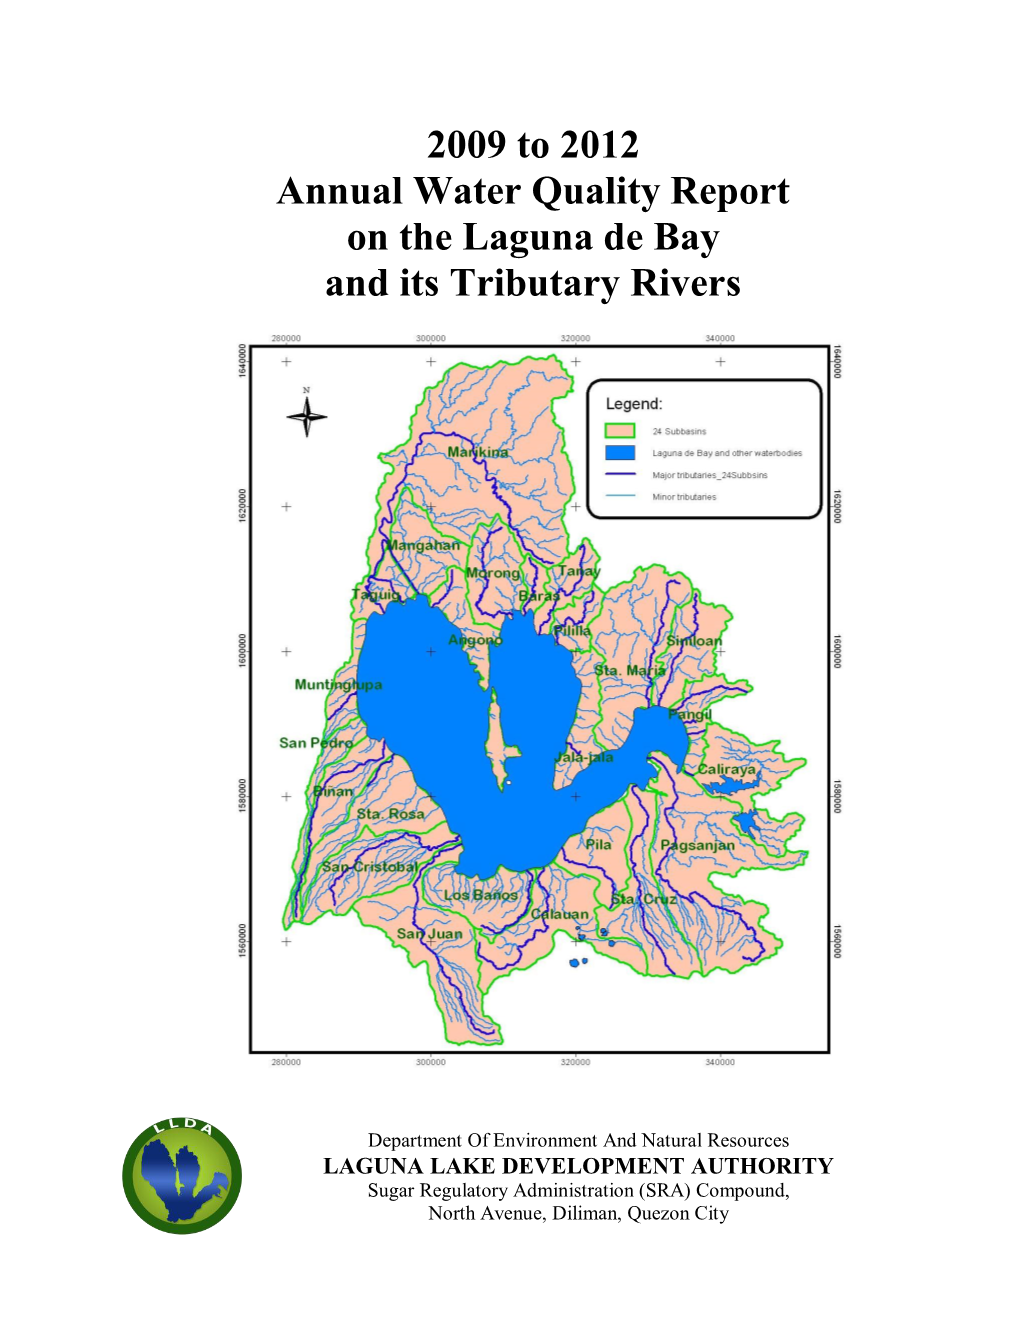 2009 to 2012 Annual Water Quality Report on the Laguna De Bay and Its Tributary Rivers